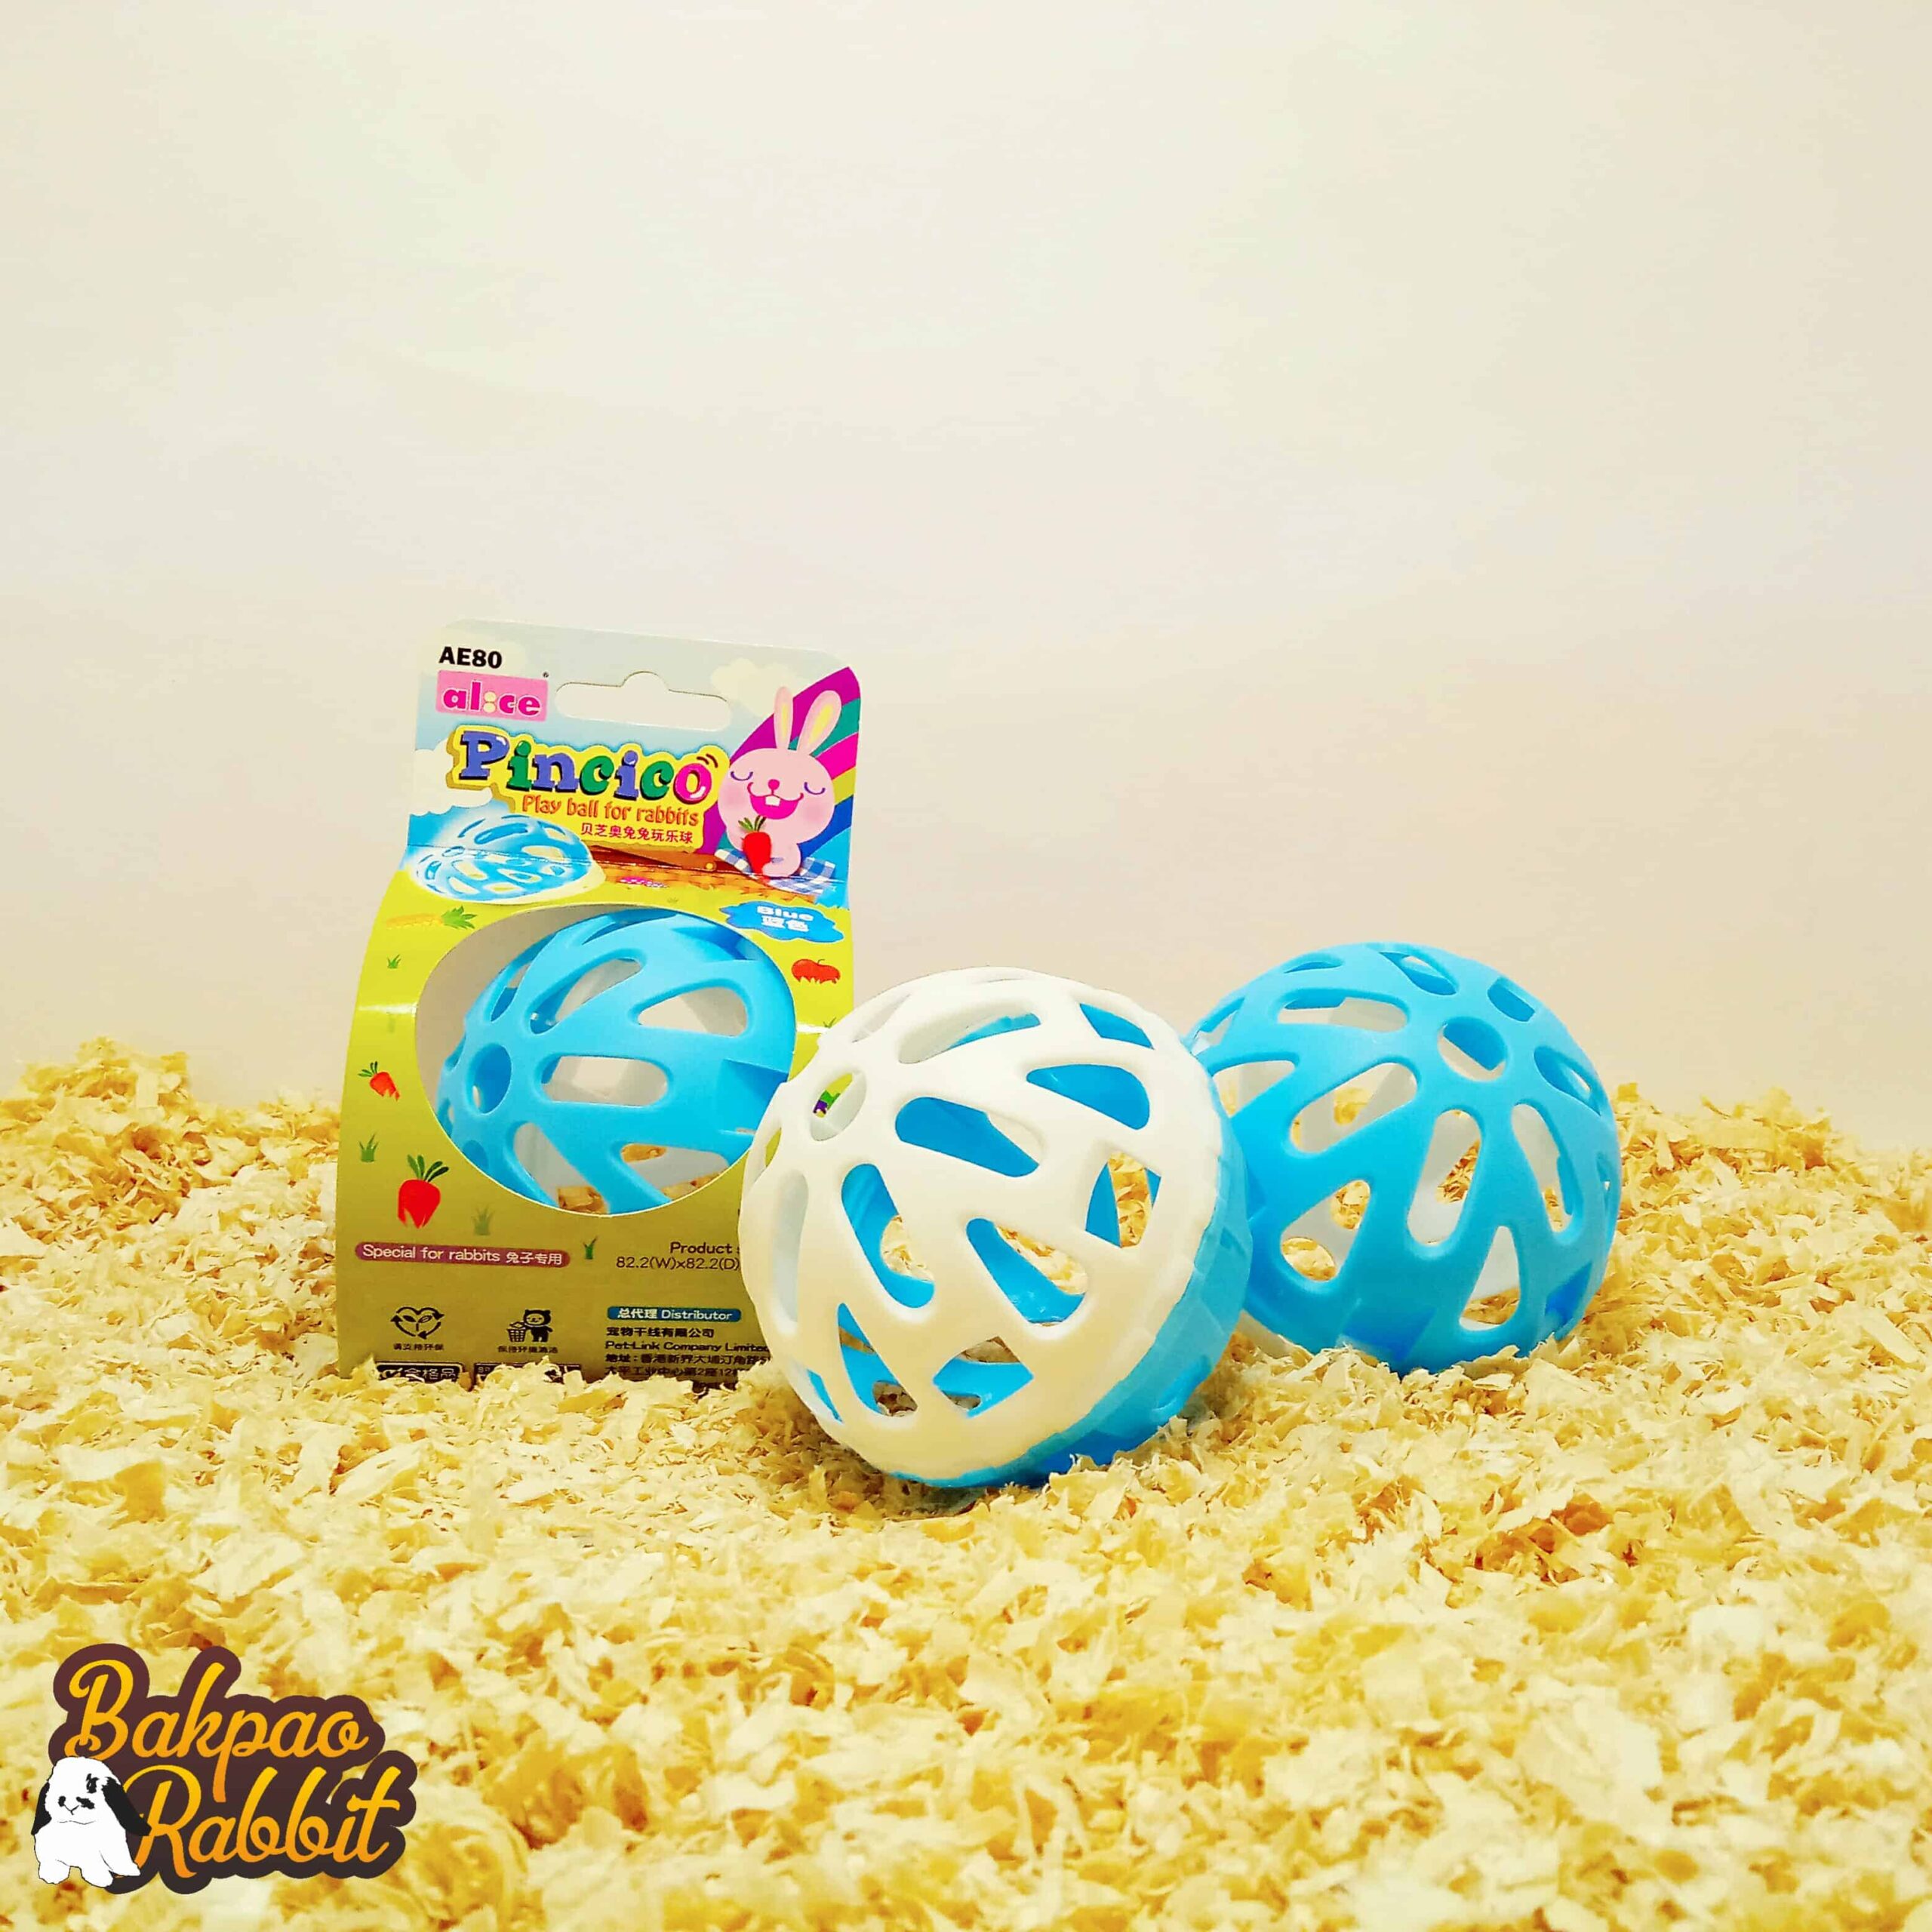 Alice AE80 Pincico Play Ball For Rabbits Blue